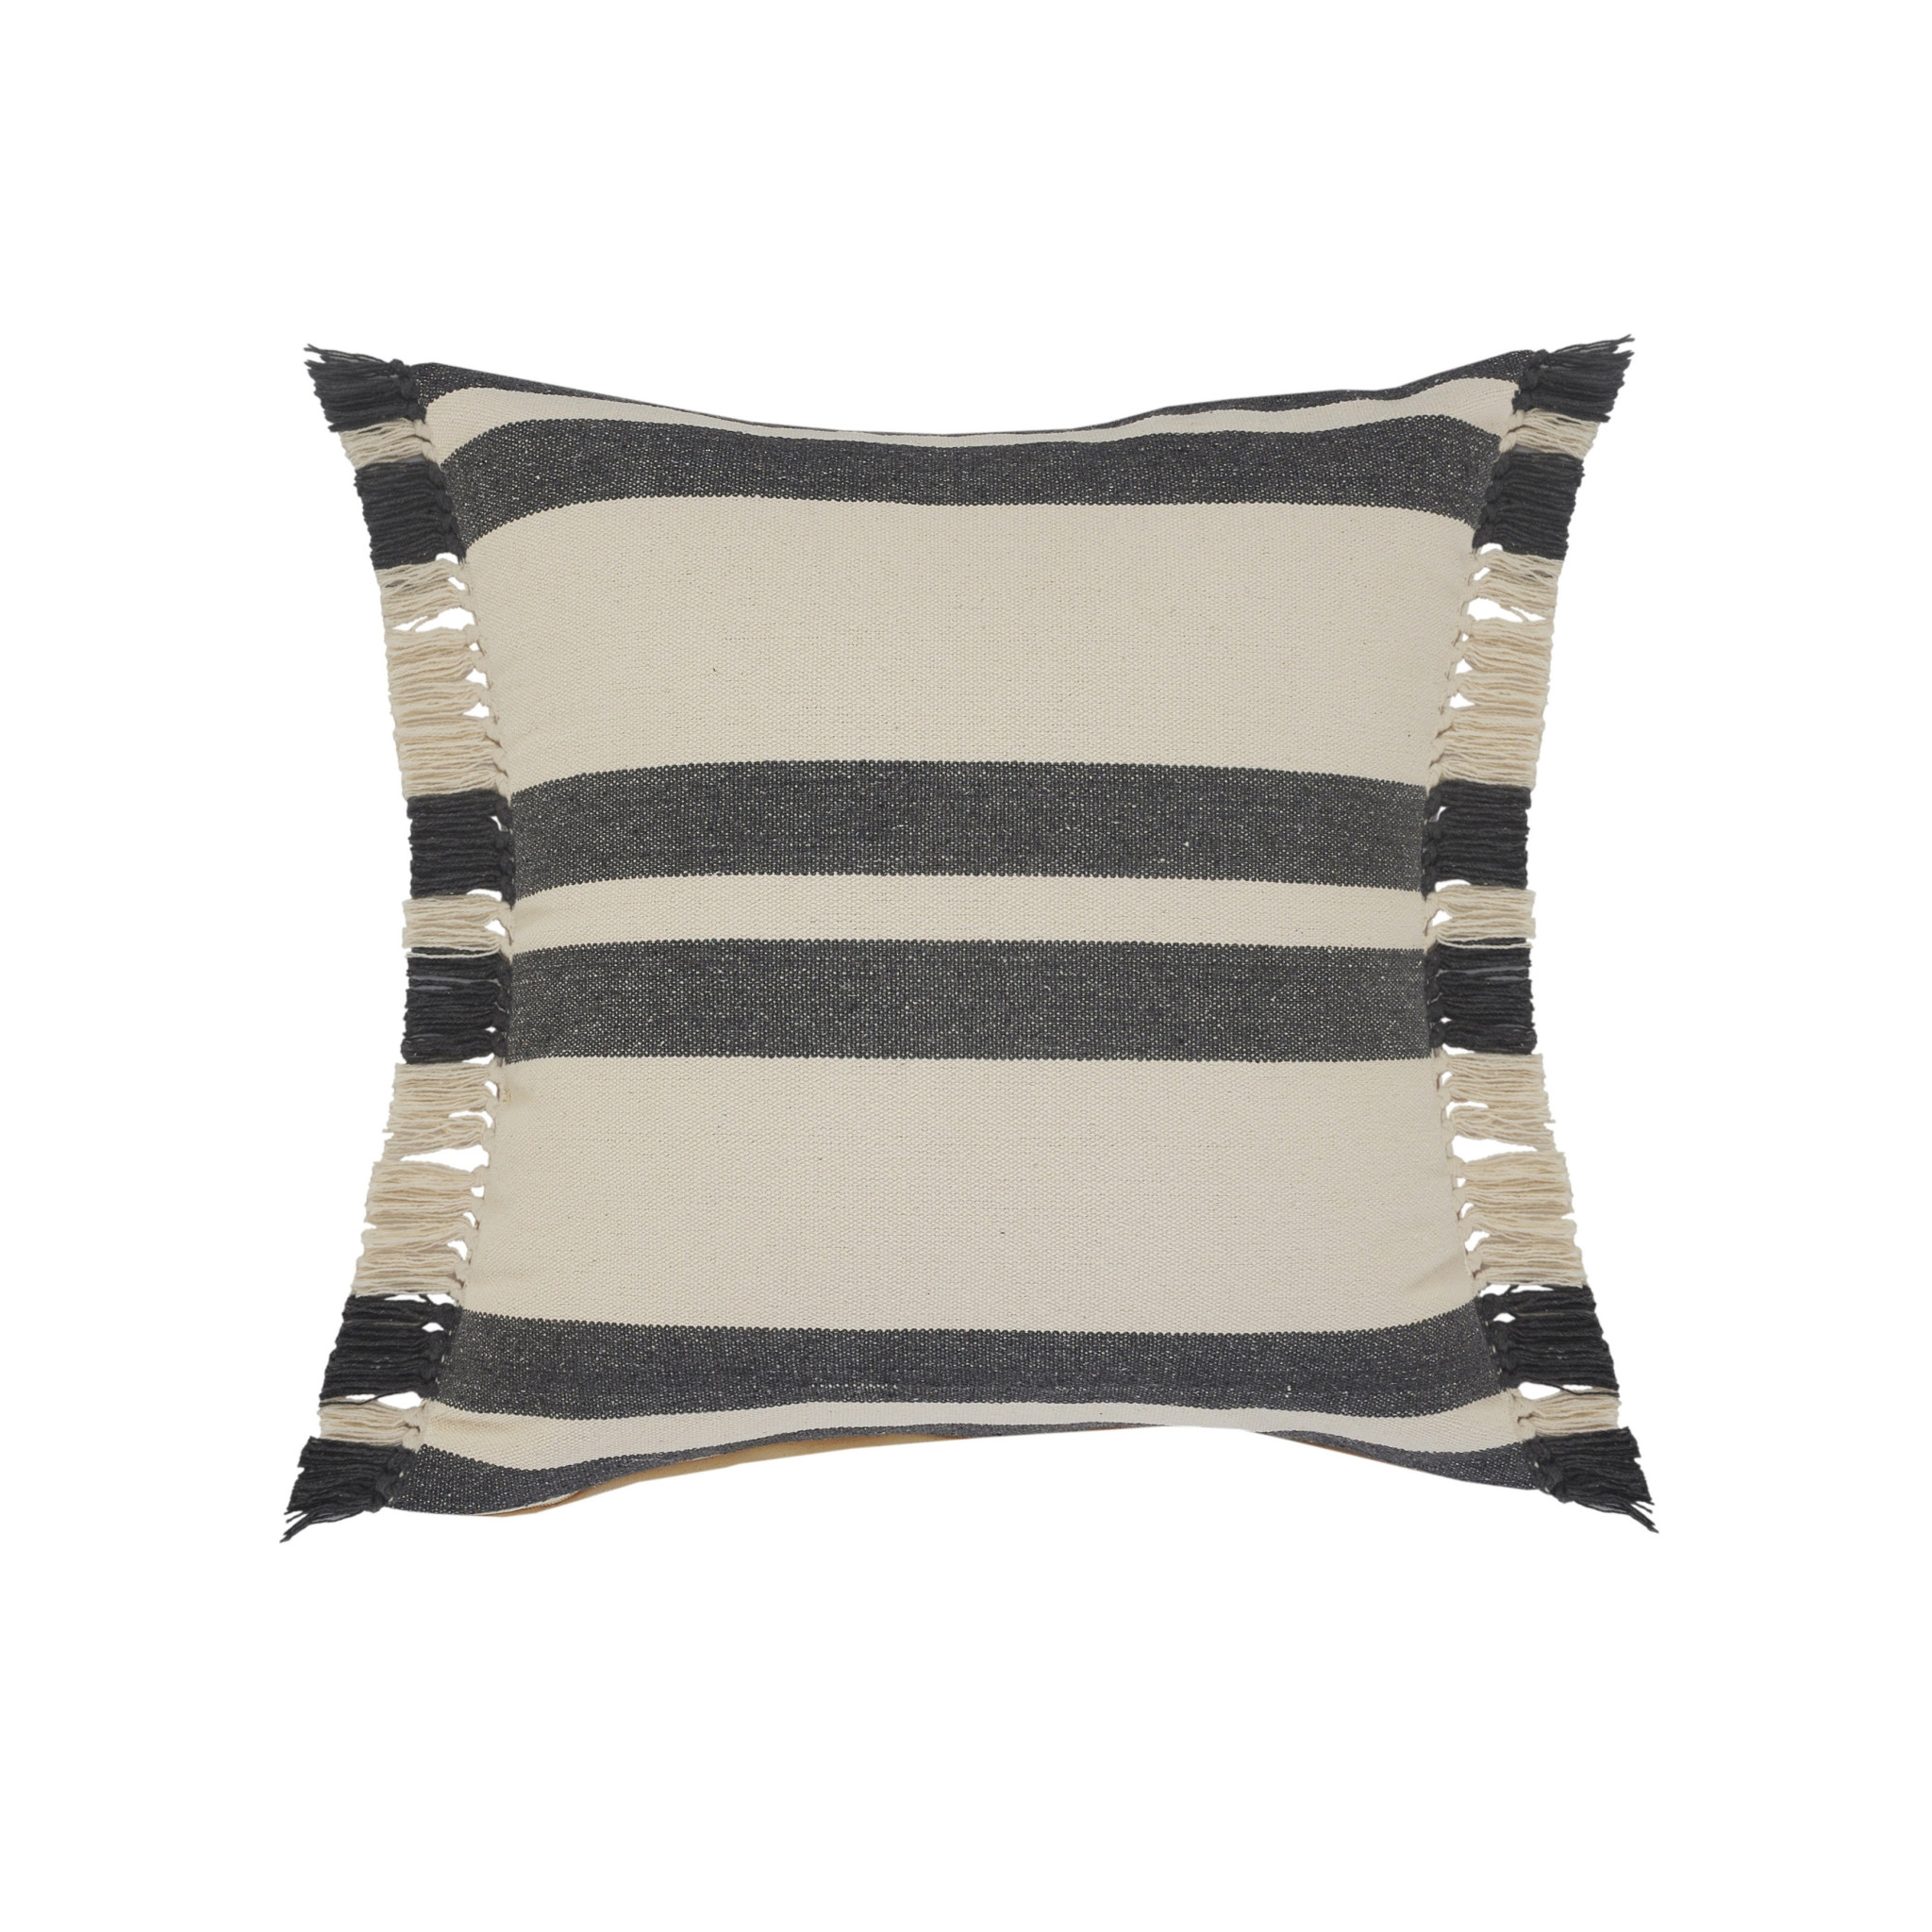 20" X 20" Gray And White 100% Cotton Striped Zippered Pillow-516824-1